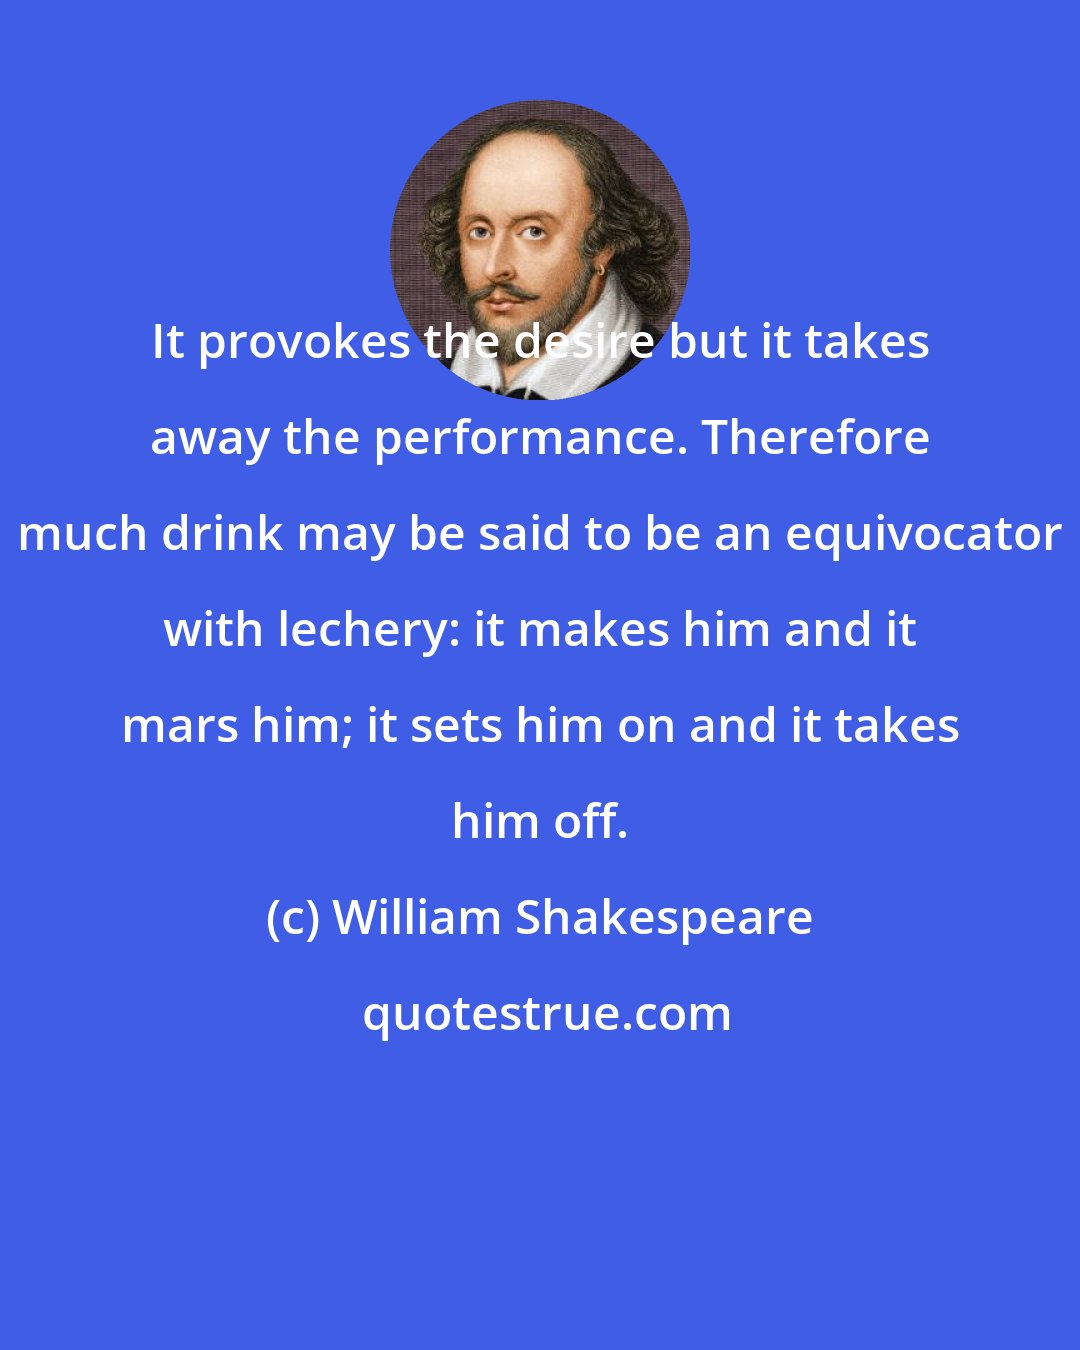 William Shakespeare: It provokes the desire but it takes away the performance. Therefore much drink may be said to be an equivocator with lechery: it makes him and it mars him; it sets him on and it takes him off.